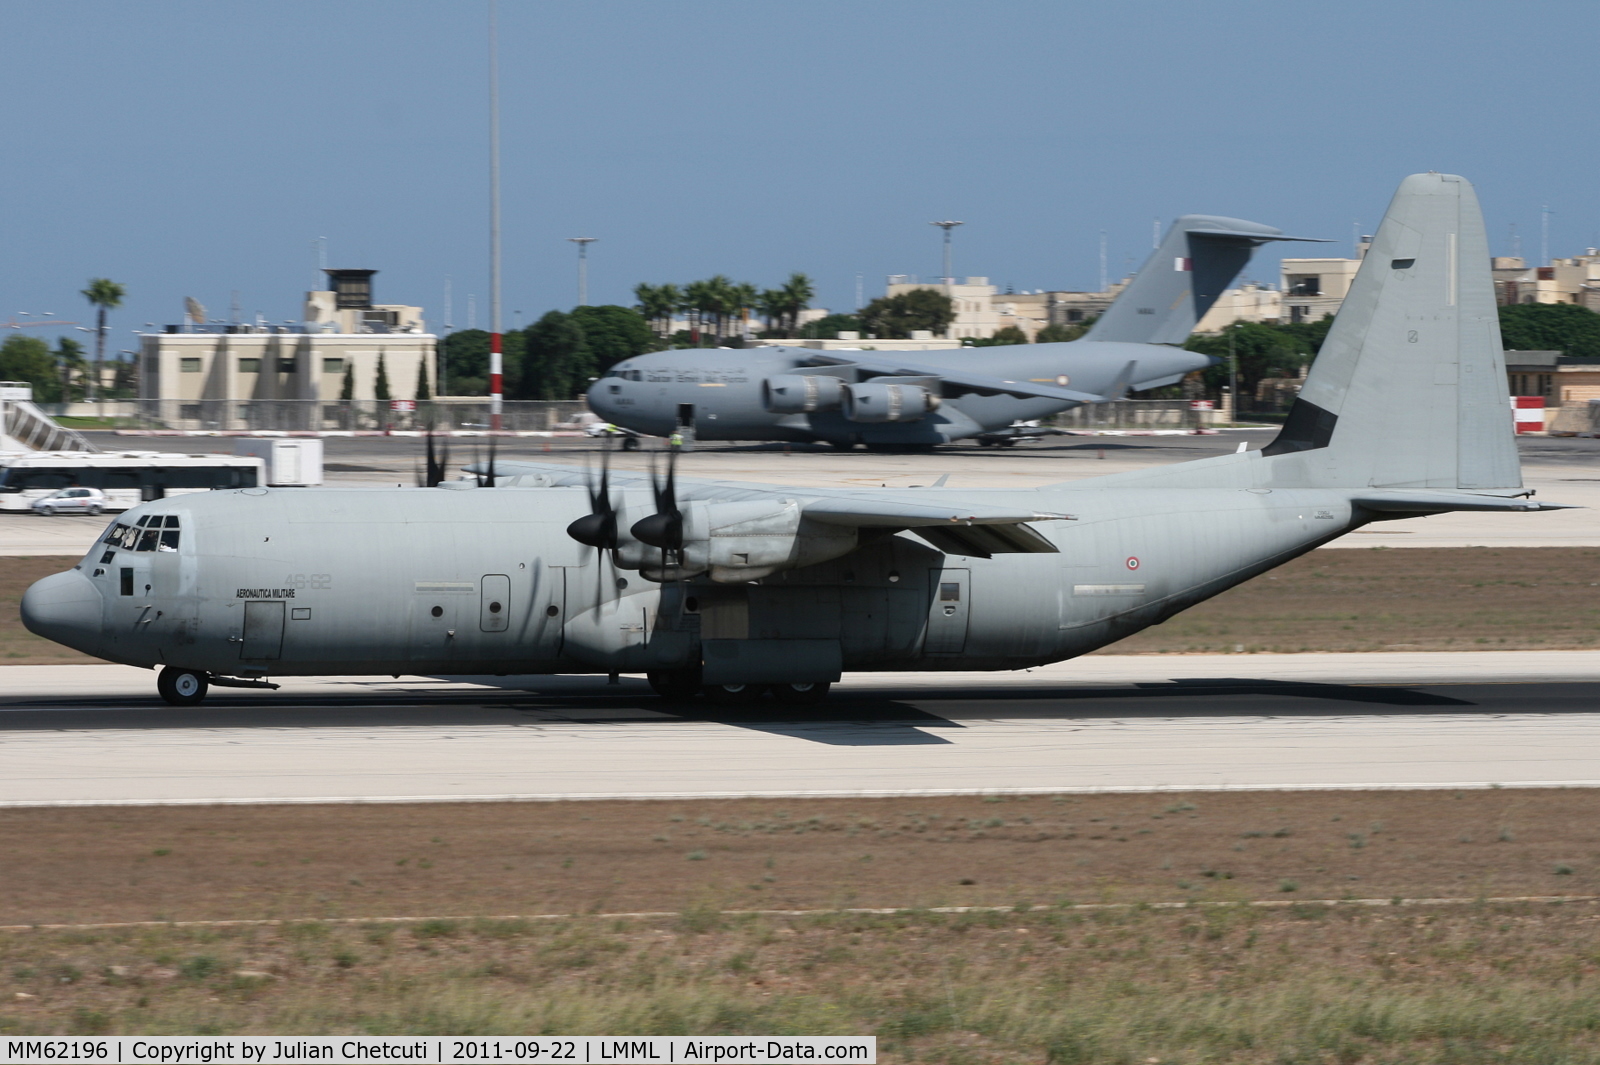 MM62196, Lockheed Martin C-130J-30 Super Hercules C/N 382-5550, Arrived in Malta as supporting aircraft for the Italian flying display team Frecce Tricolori during the Malta International Airshow 2011